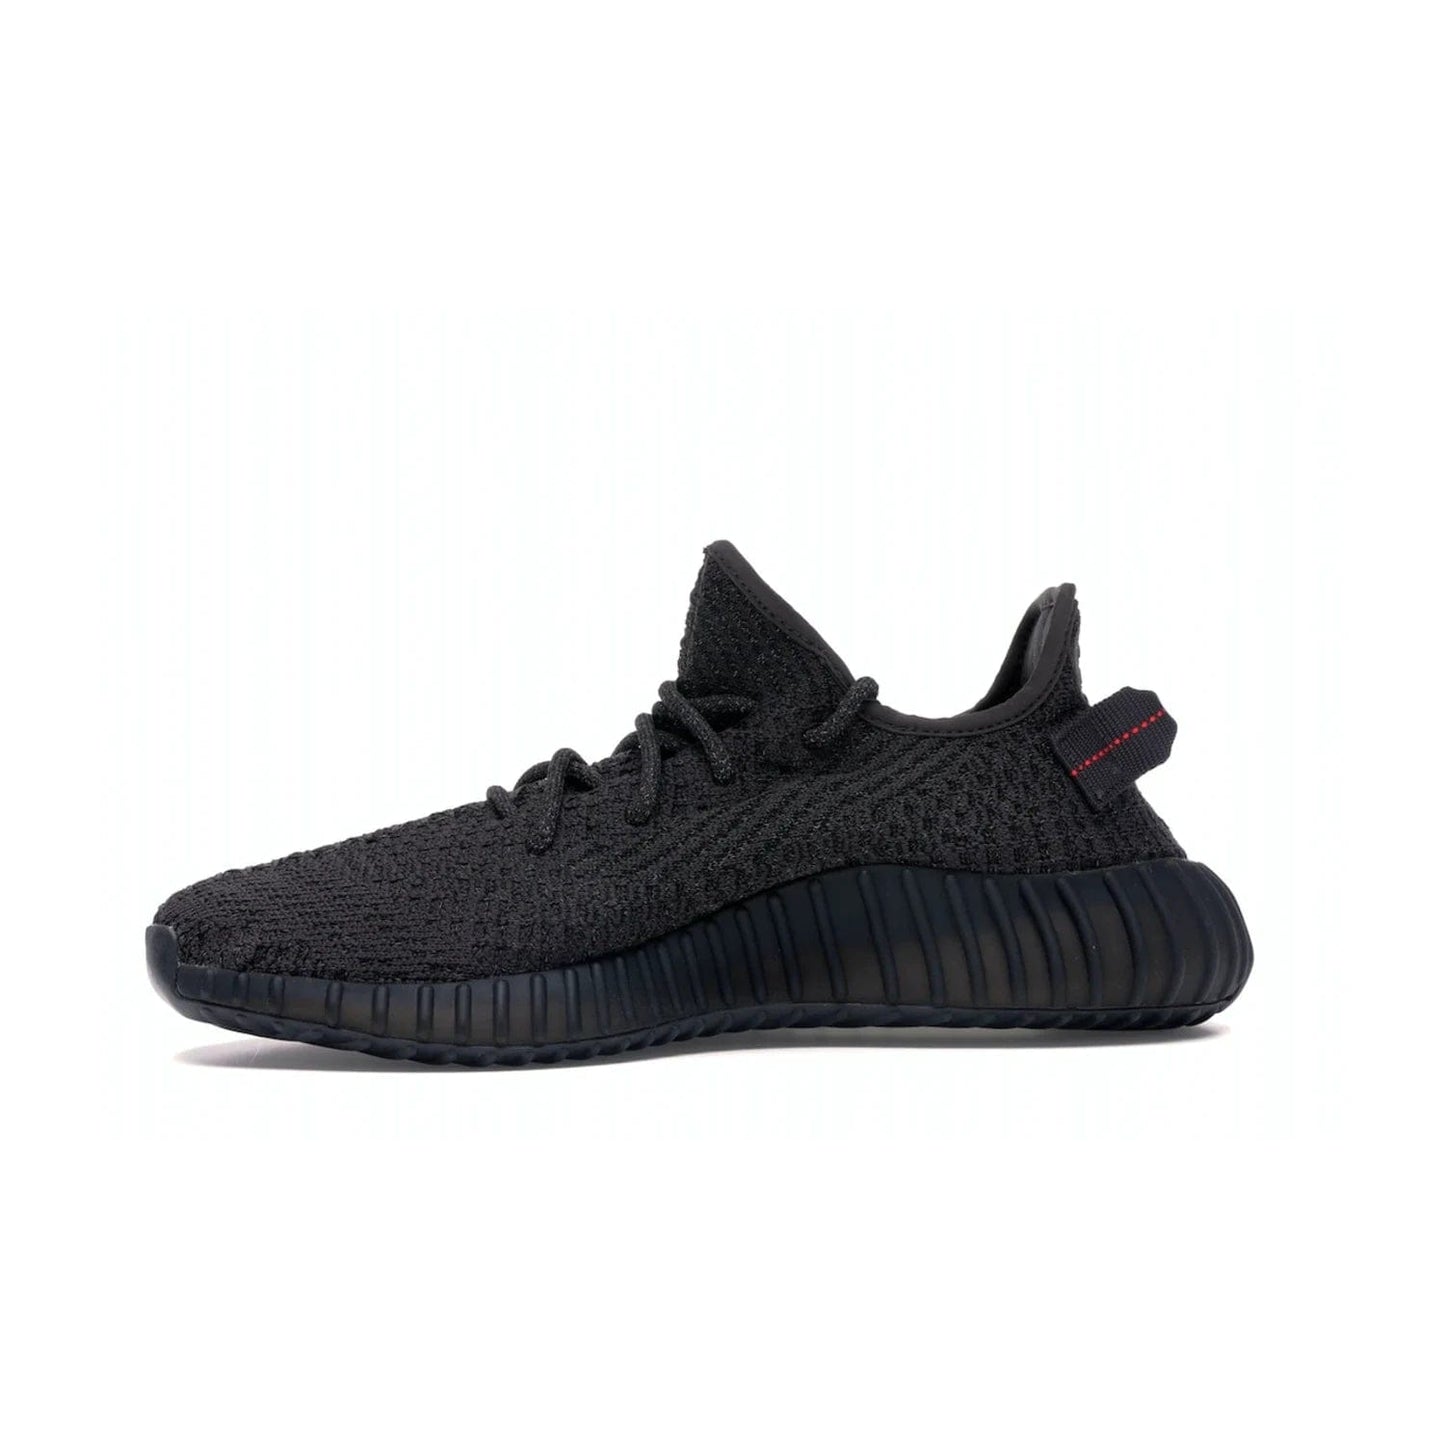 adidas Yeezy Boost 350 V2 Static Black (Reflective) - Image 18 - Only at www.BallersClubKickz.com - Make a statement with the adidas Yeezy Boost 350 V2 Static Black Reflective. All-black upper, reflective accents, midsole, and sole combine for a stylish look. High quality materials. June 2019 release. Add to your collection today.